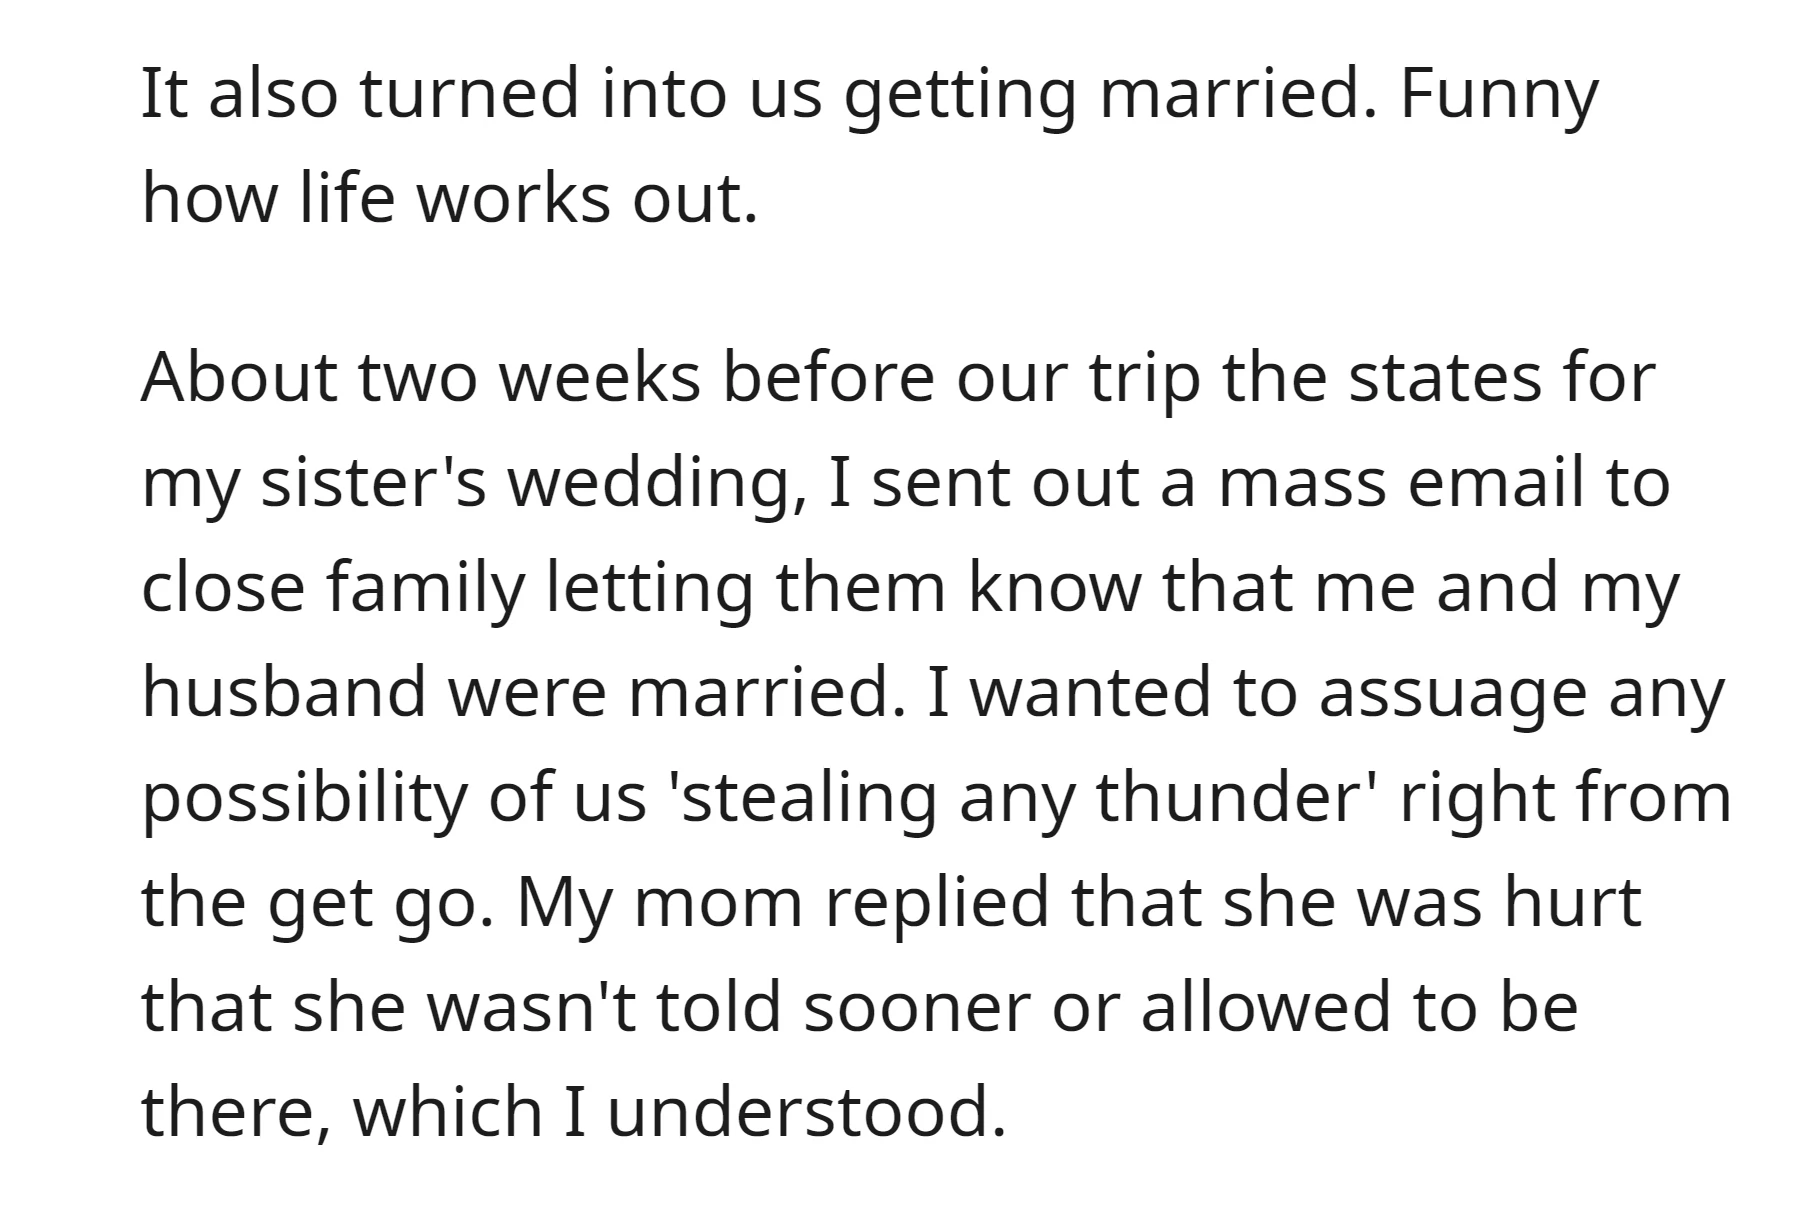 He sent a mass email to close family about it two weeks before his sister's wedding, but his mom felt hurt for not being informed sooner